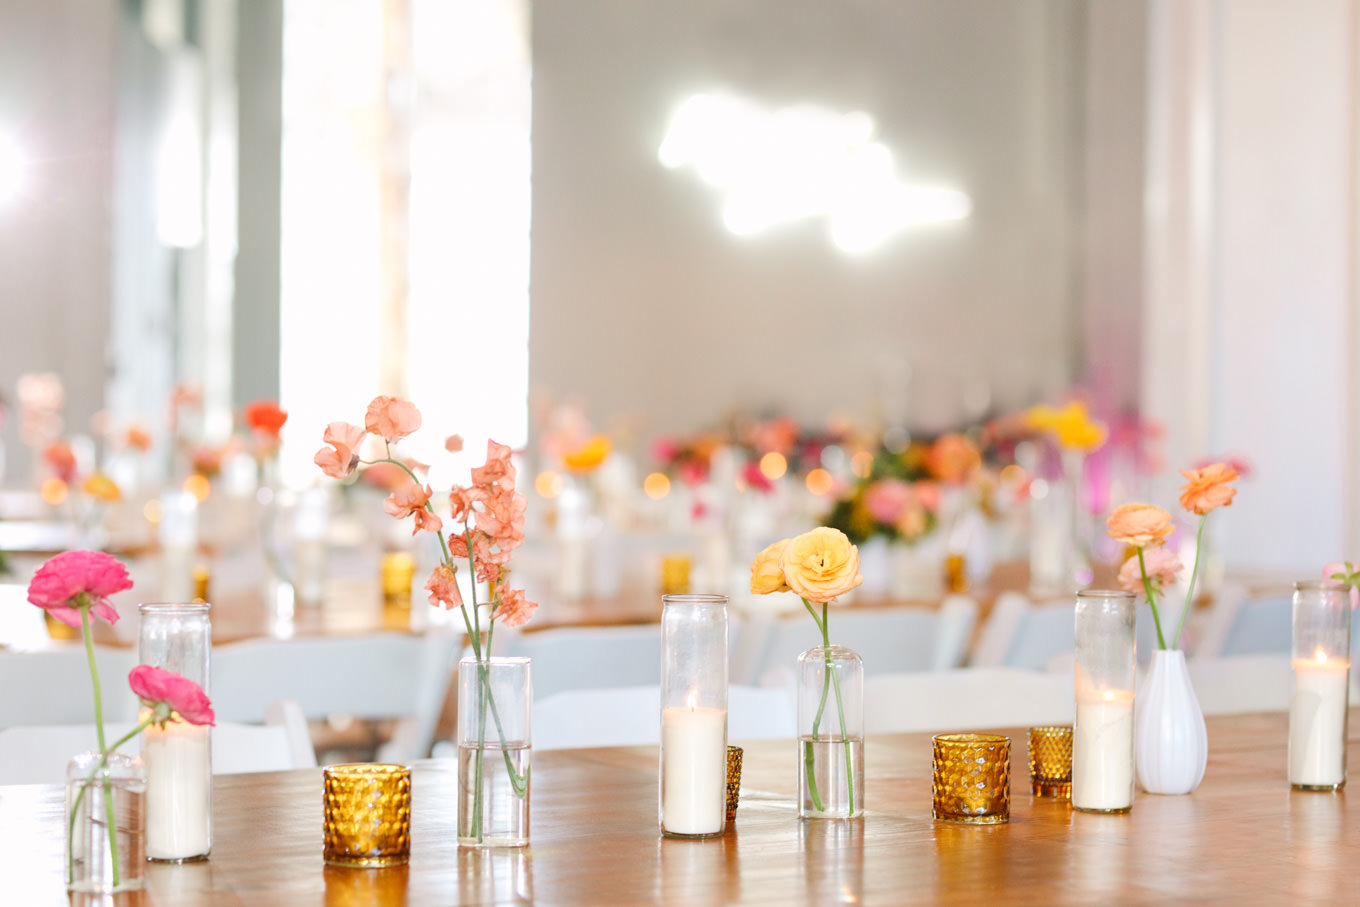 Bud vases at Unique Space | Colorful wedding at The Unique Space Los Angeles published in The Knot Magazine | Fresh and colorful photography for fun-loving couples in Southern California | #colorfulwedding #losangeleswedding #weddingphotography #uniquespace Source: Mary Costa Photography | Los Angeles